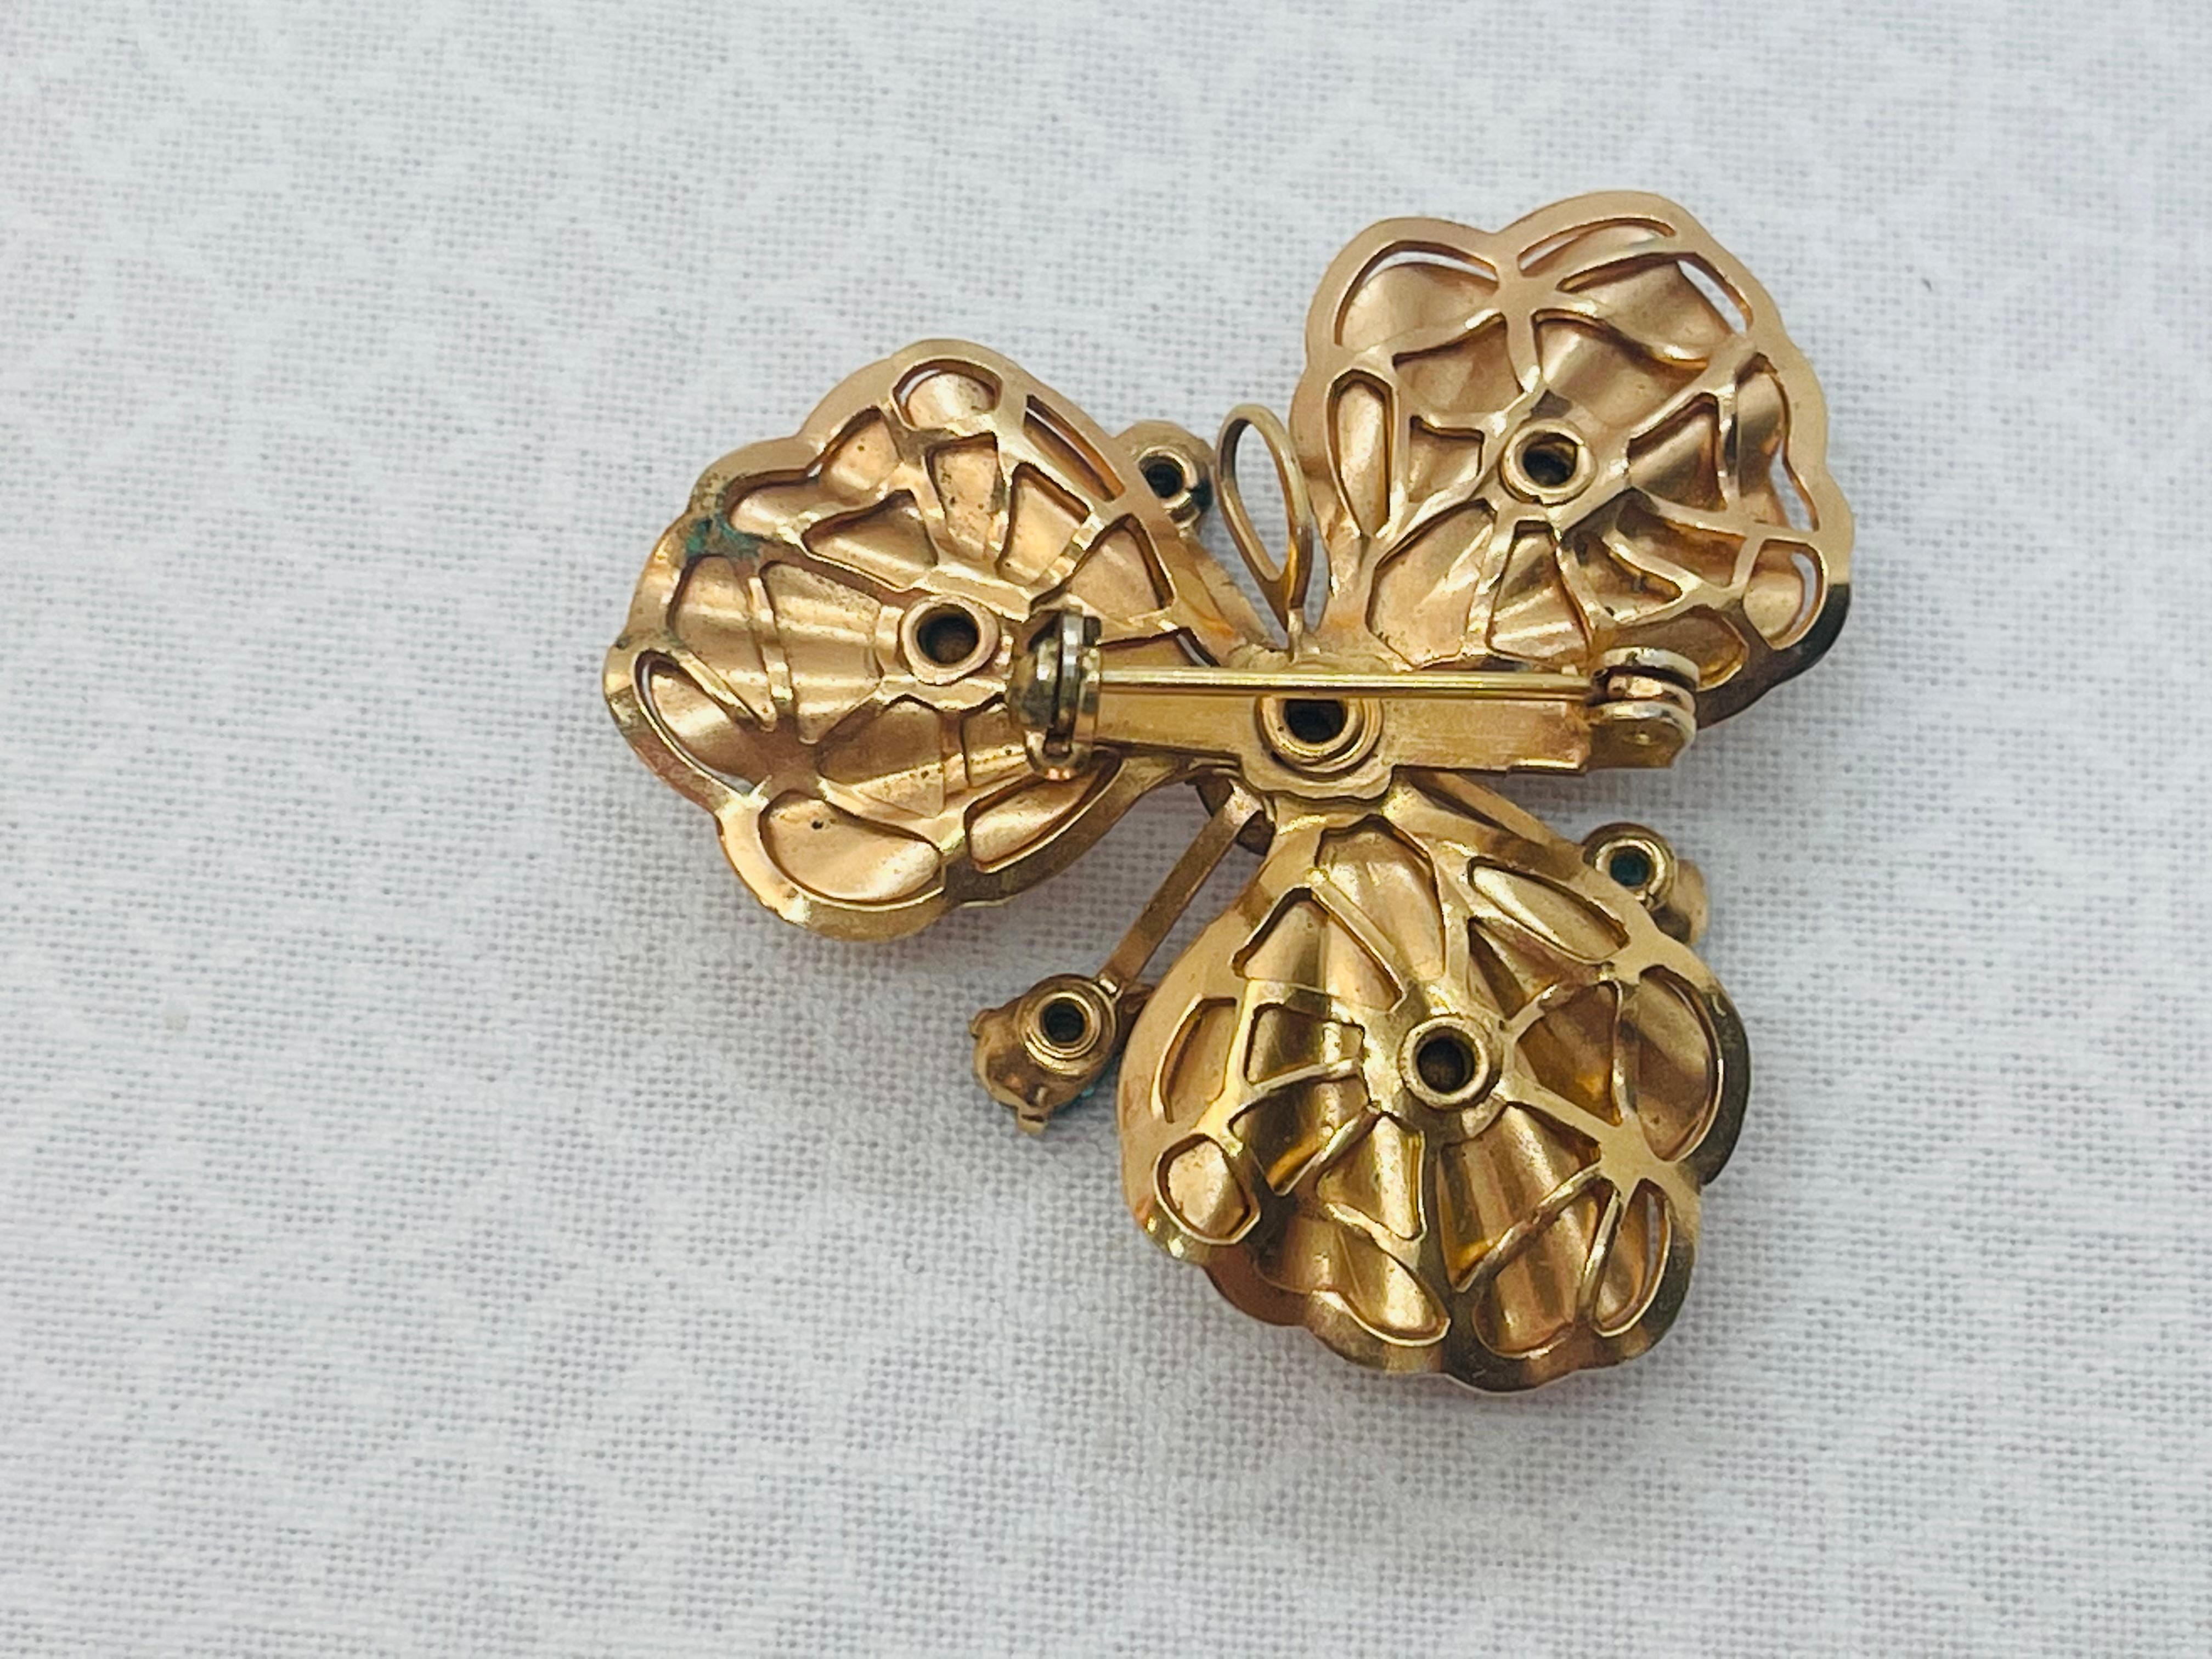 Bugbee & Niles Matching Earrings and Brooch Set Circa. 1955s - 1959 For Sale 4